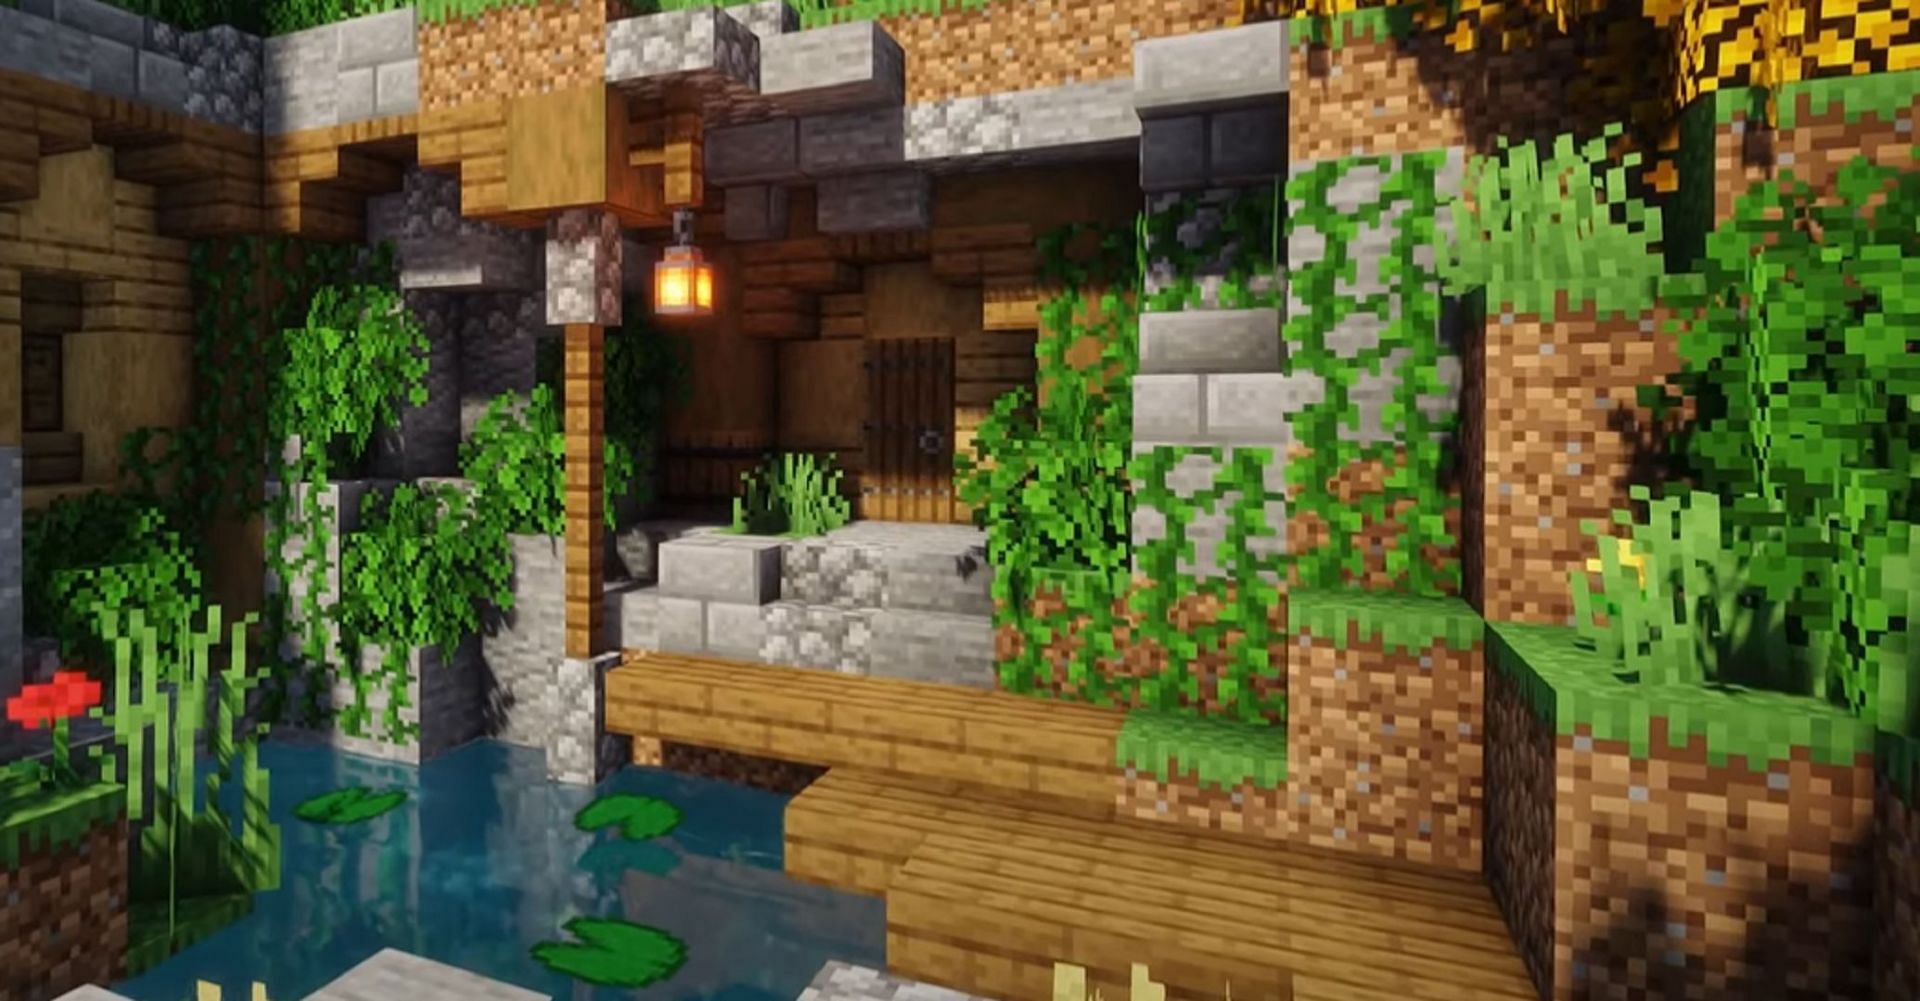 This home design has a very rustic, overgrown feel (Image via Krizzta/YouTube)